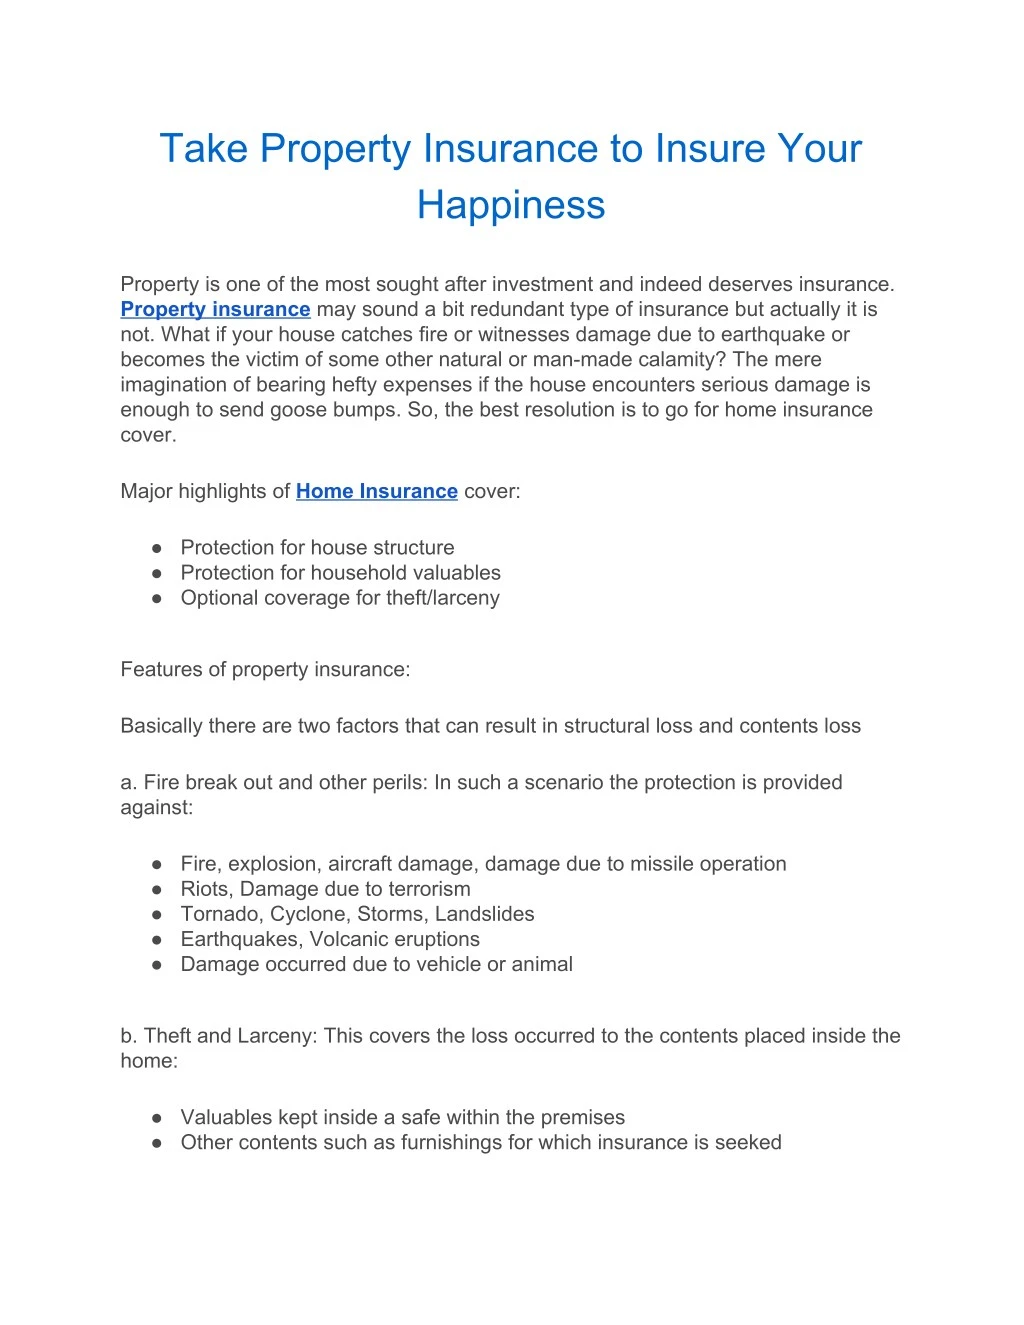 take property insurance to insure your happiness